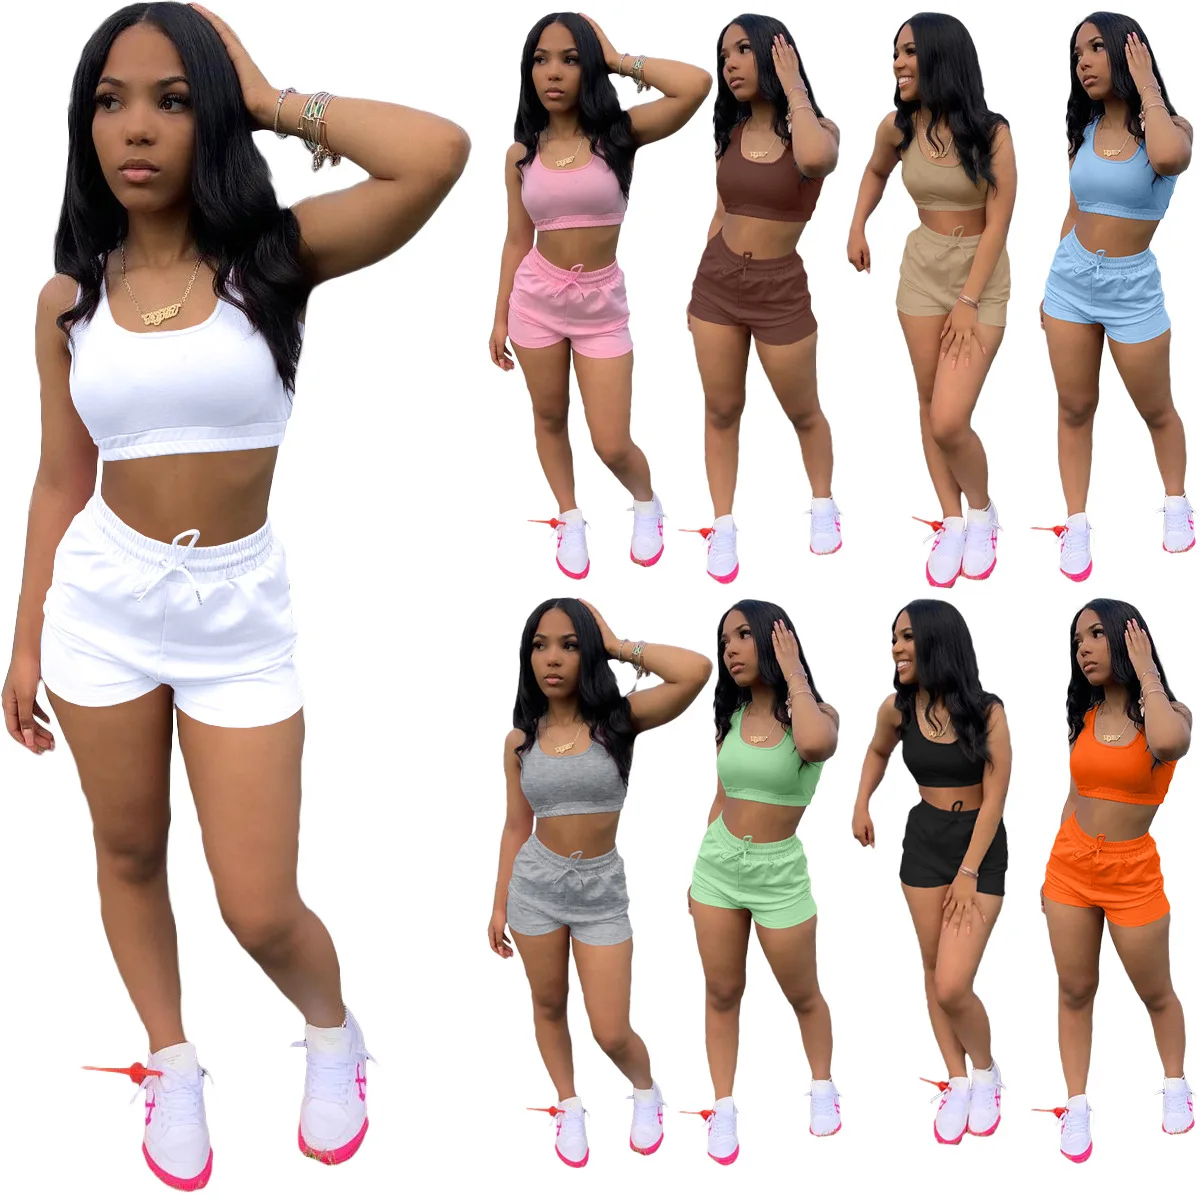 

New Arrivals 2022 Solid Sleeveless Vest Crop Top Shorts Two Piece Set Women Clothing Summer Casual Jogger Shorts Sport Set, White,pink,orange,gray,black,coffee,khaki,green,sky blue